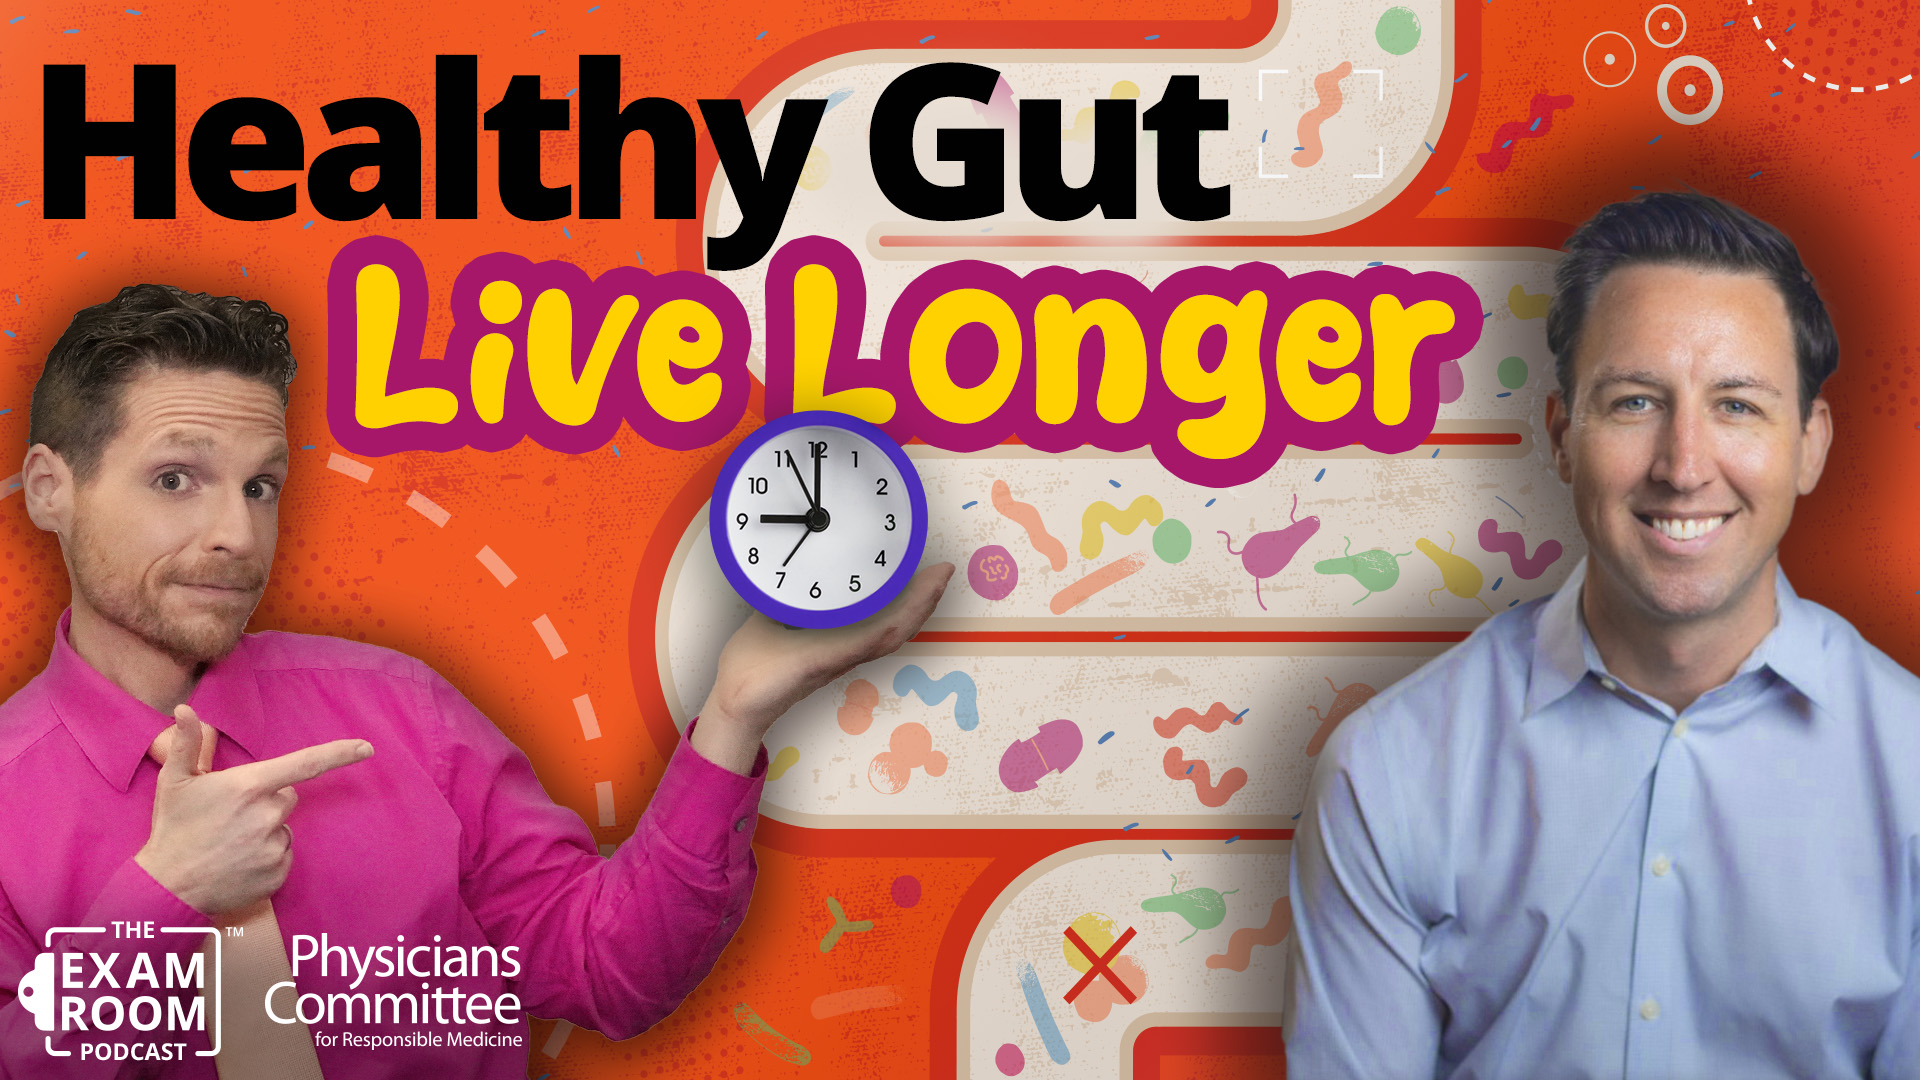 Healthy Gut Means Living Longer | Dr. Will Bulsiewicz Exam Room Live Q&A